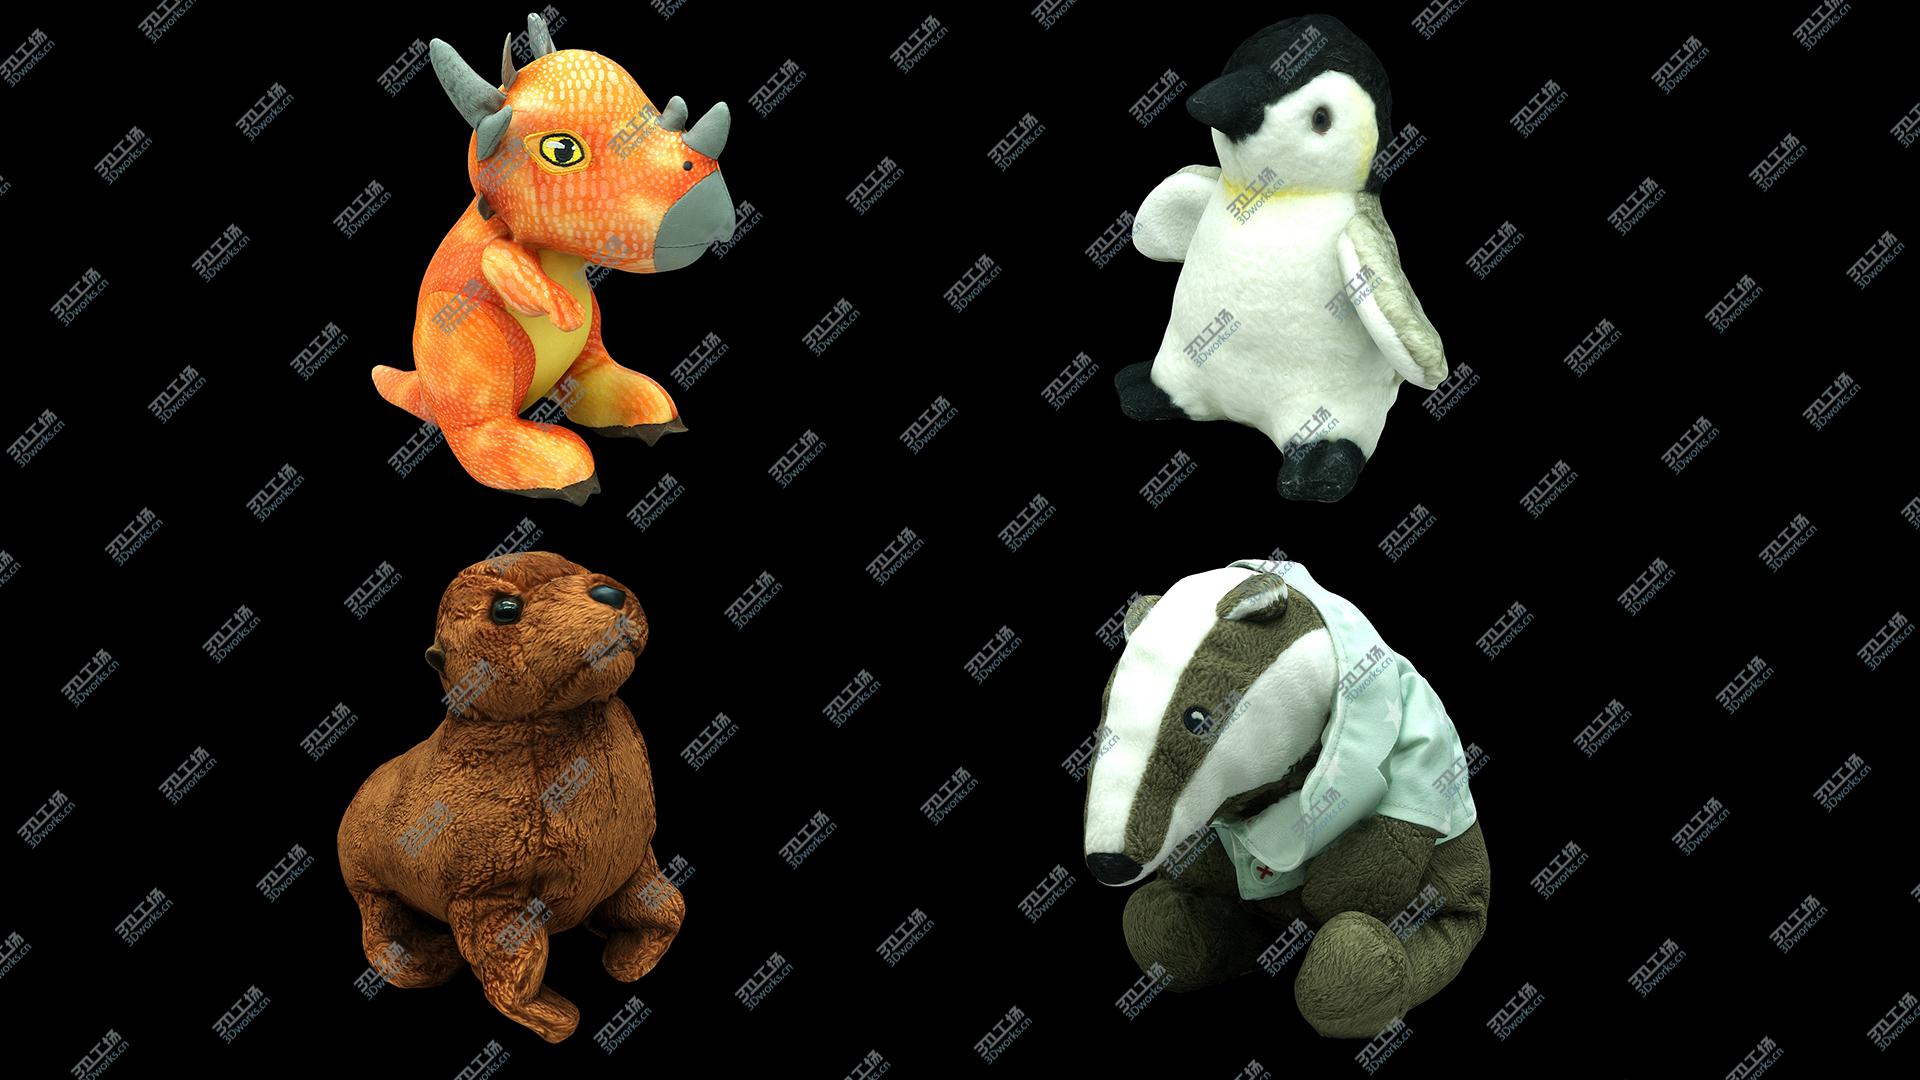 images/goods_img/202105071/Plush Animal Collection 02 3D model/2.jpg